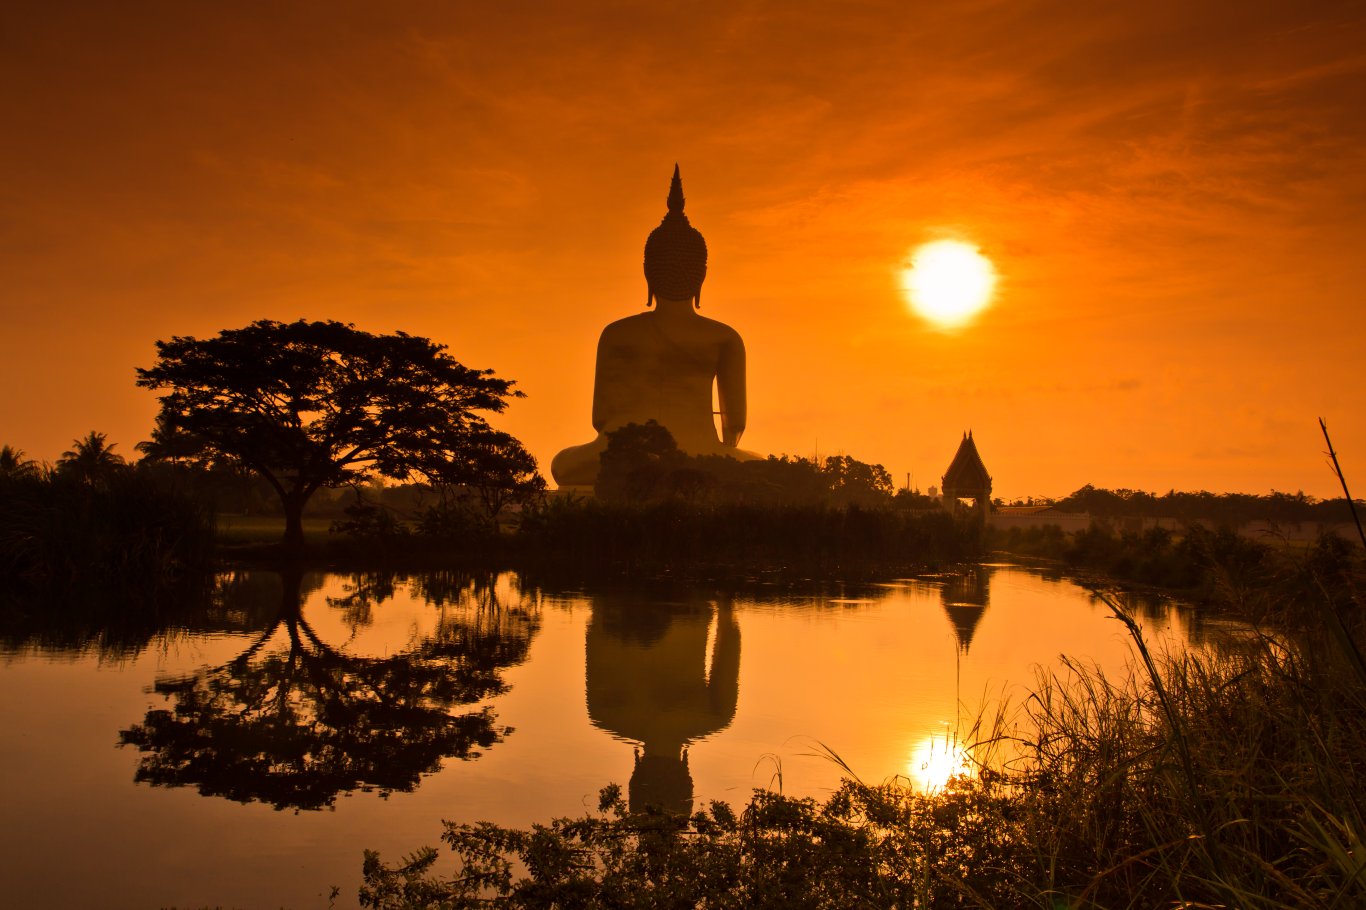 A scenic photo of a Buddha statue at sunset by a lake 